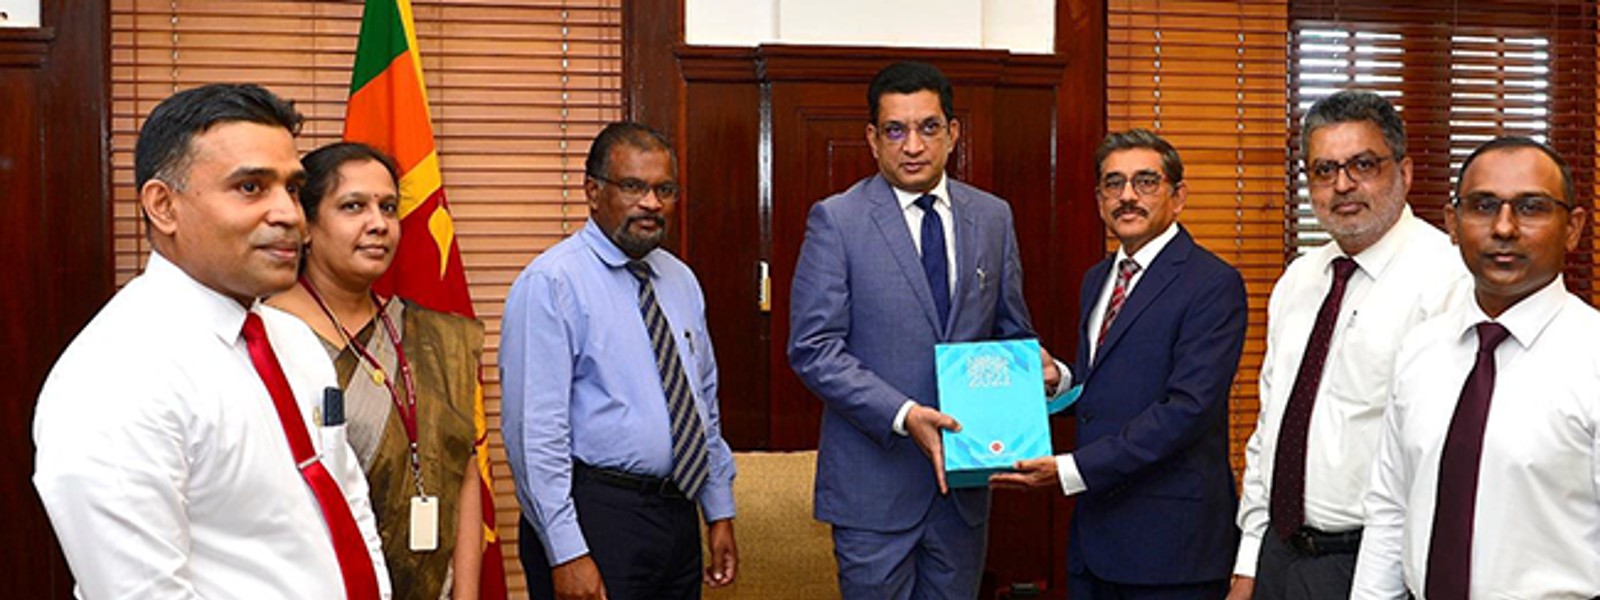 CBSL annual report presented to Finance Minister